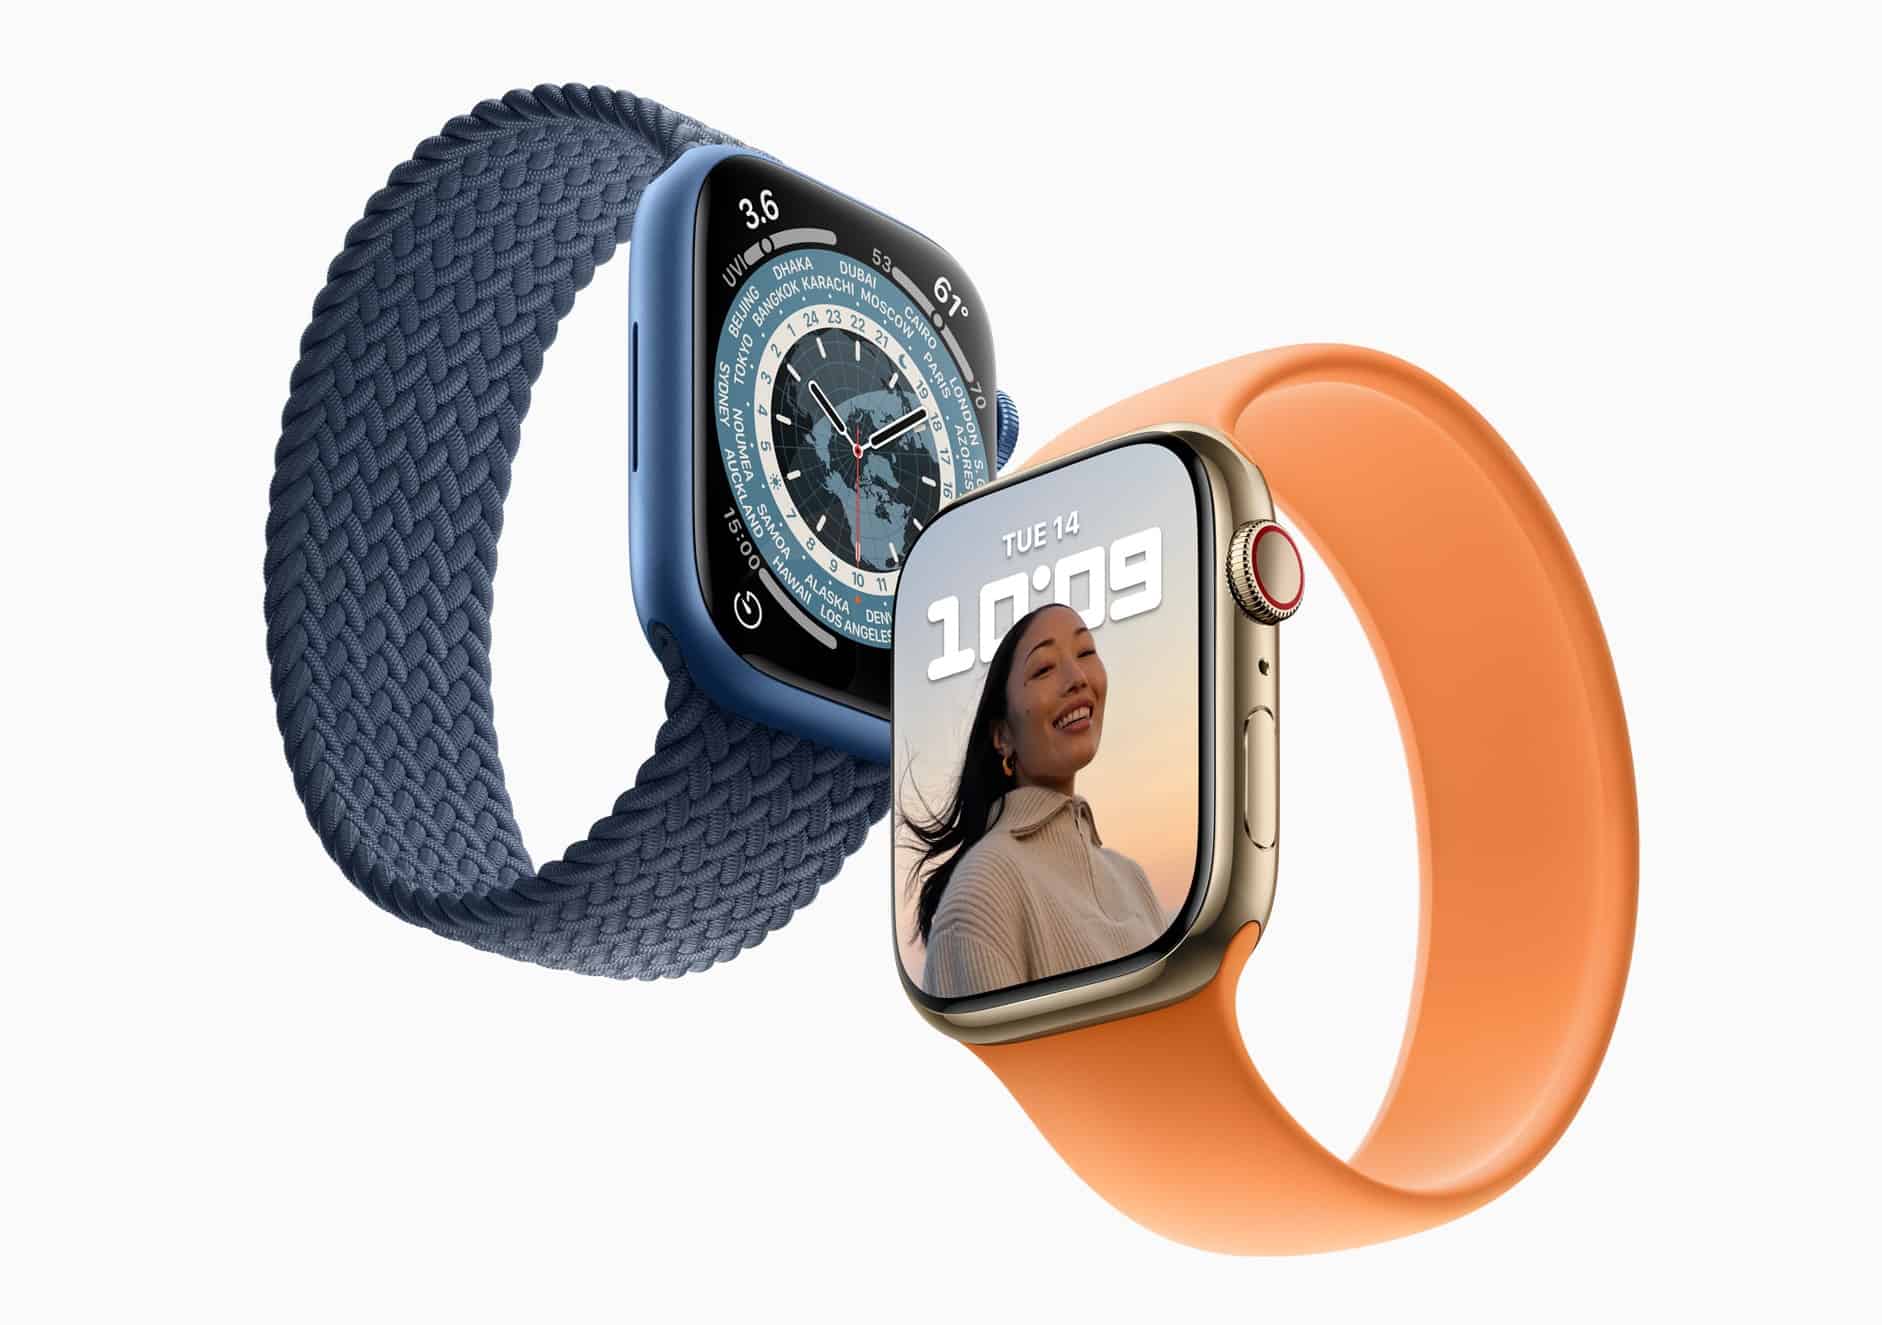 Deal Alert: Apple Watch Series 7 heavily discounted at Amazon